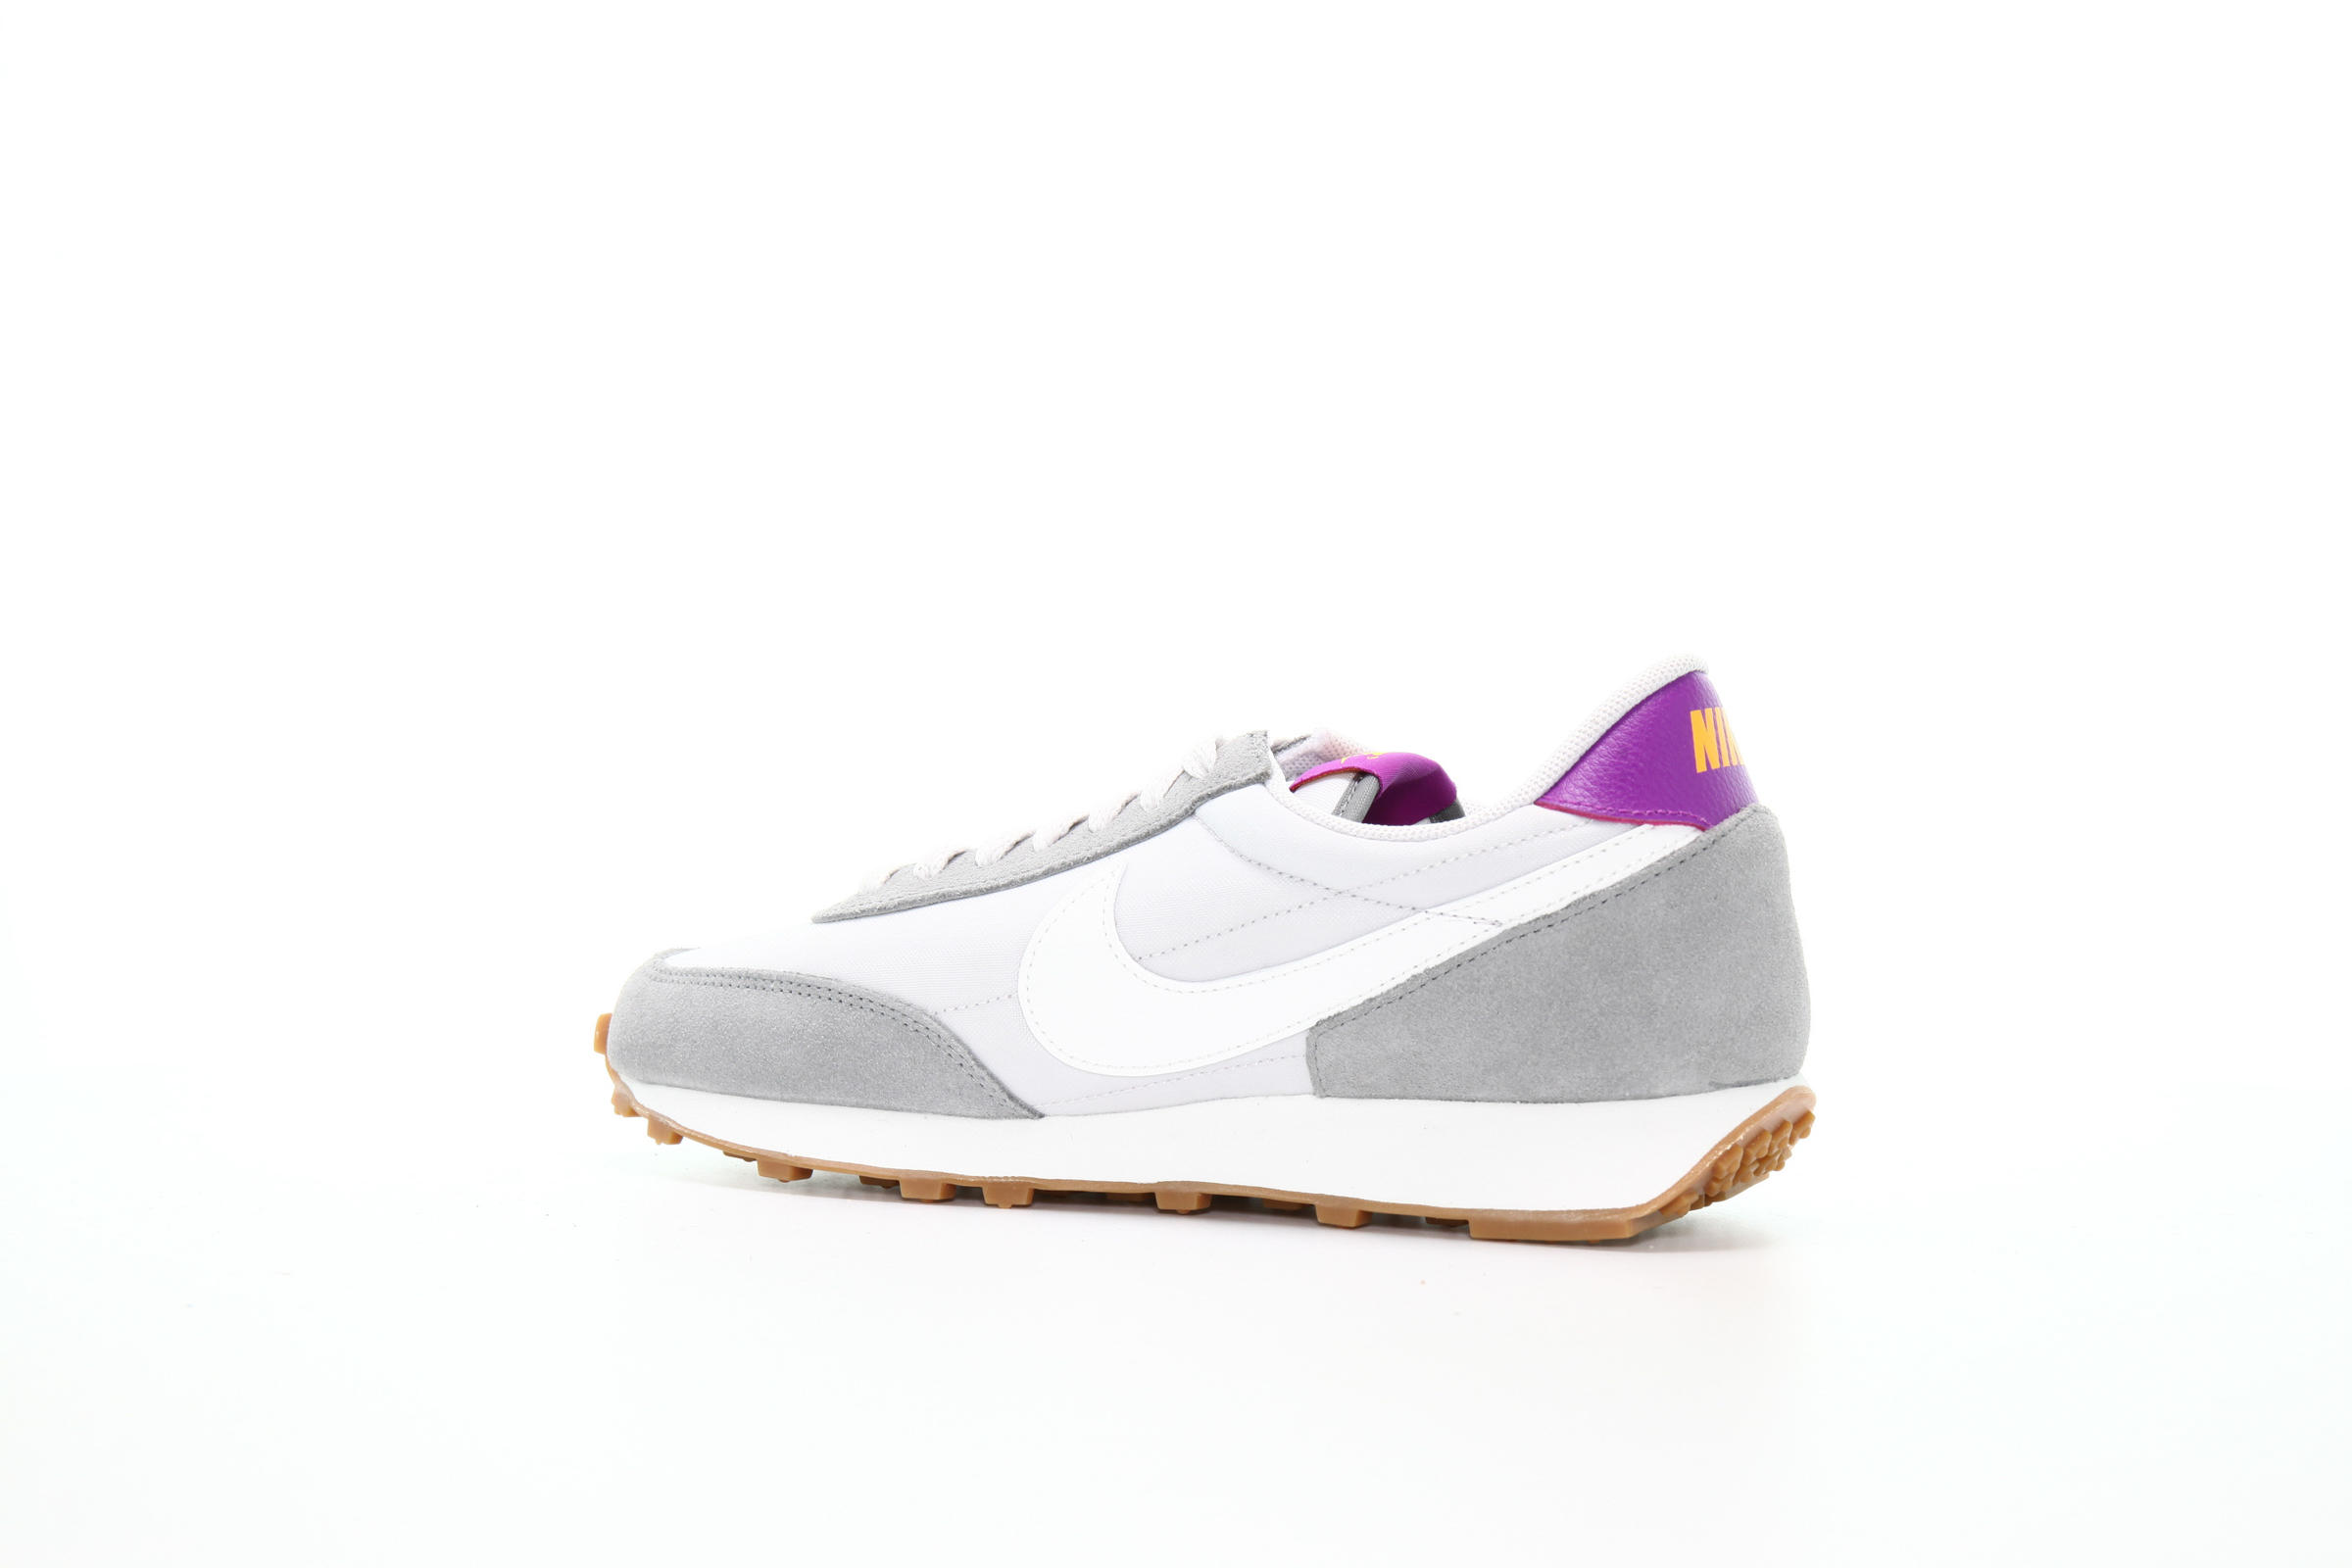 Nike WMNS DAYBREAK "PARTICLE GREY"